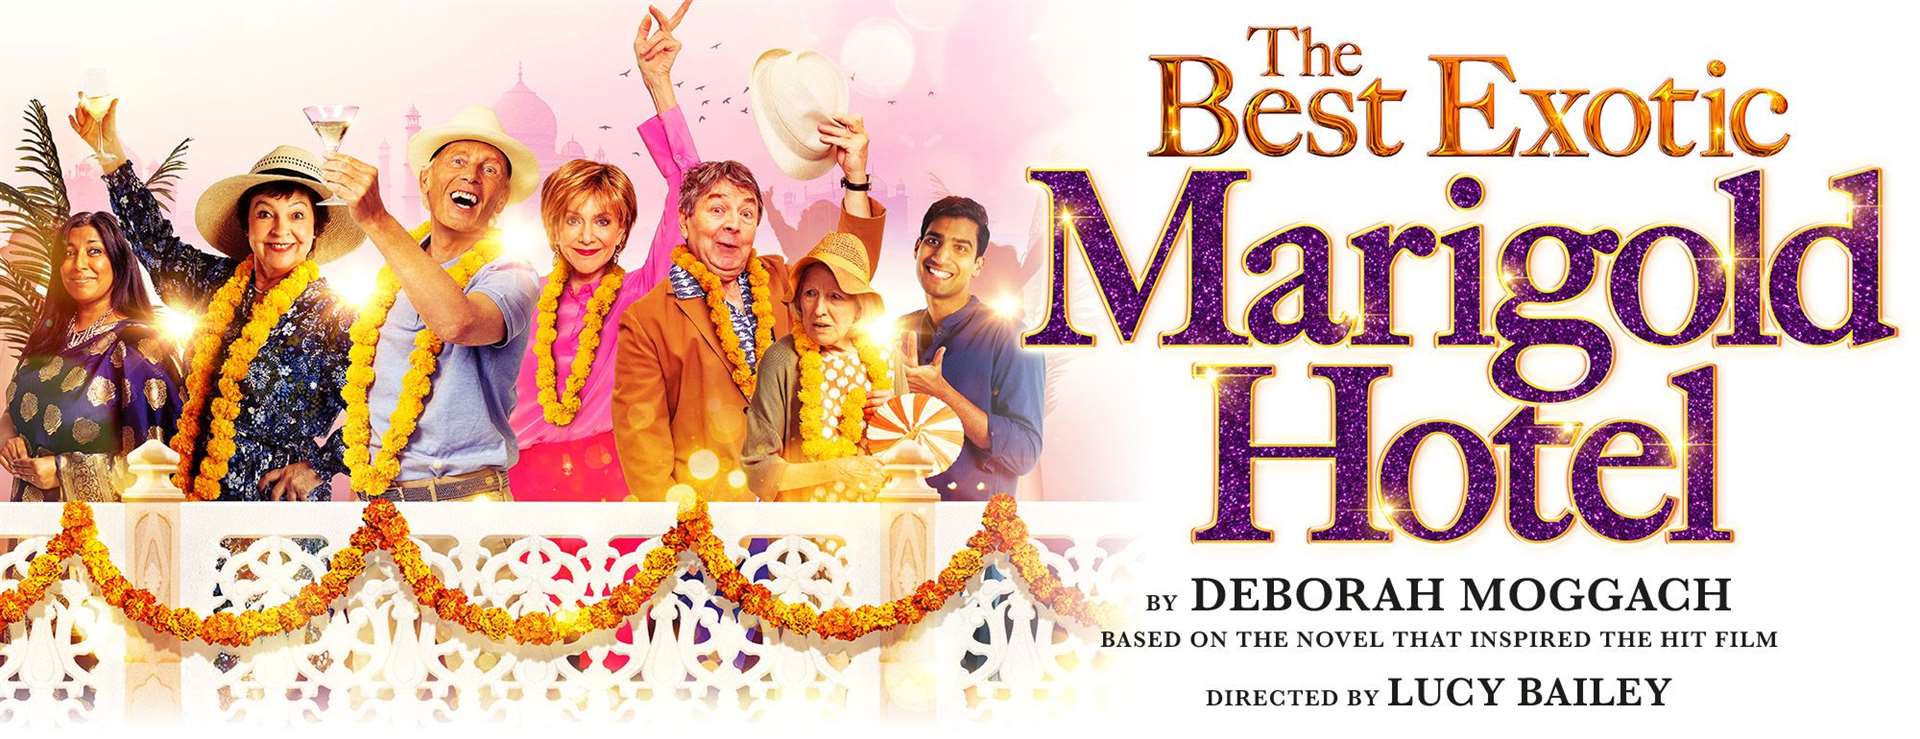 The iconic The Best Exotic Marigold Hotel is coming to the Granite City.